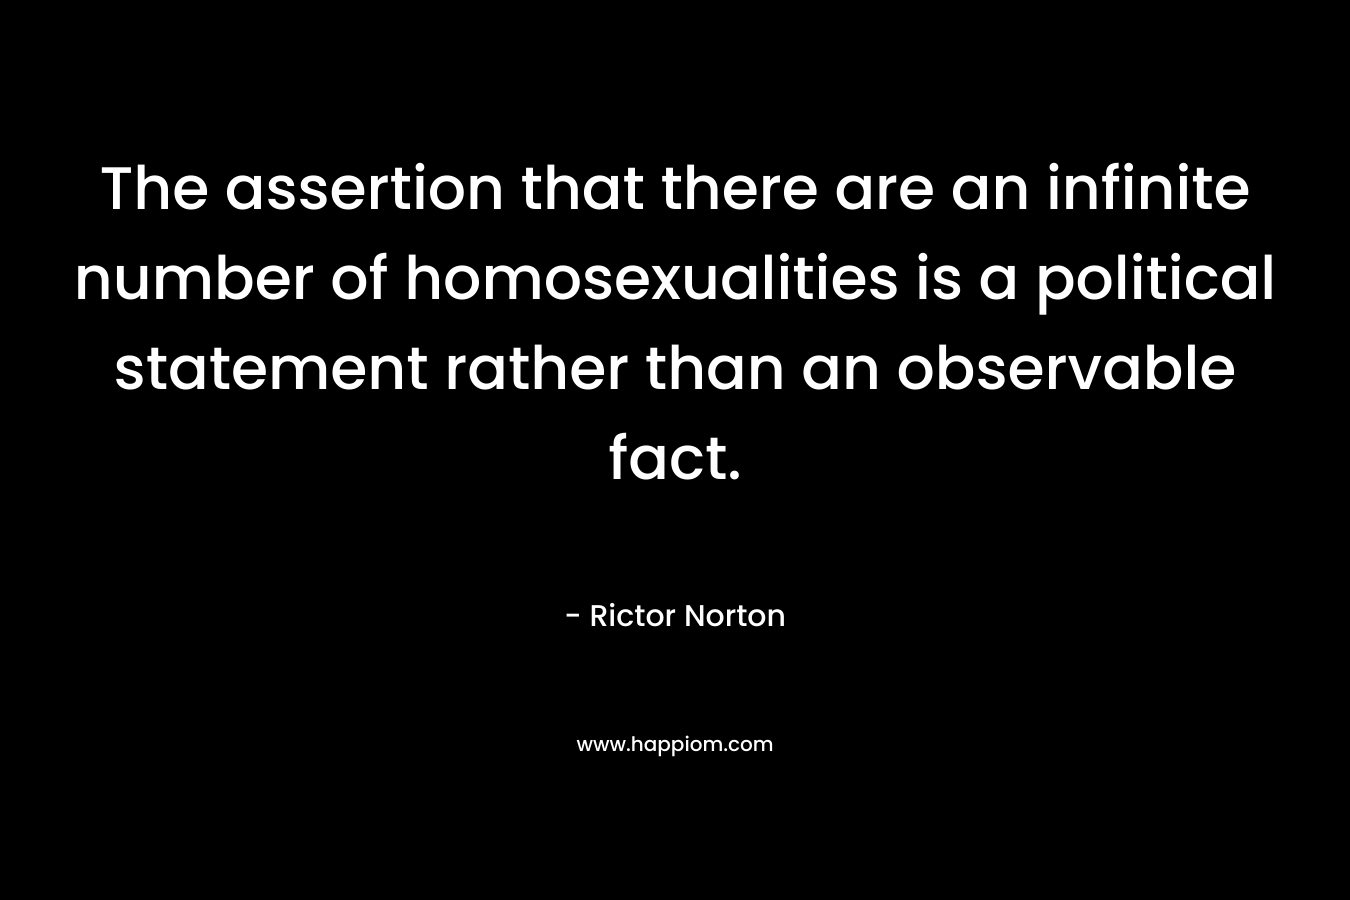 The assertion that there are an infinite number of homosexualities is a political statement rather than an observable fact. – Rictor Norton